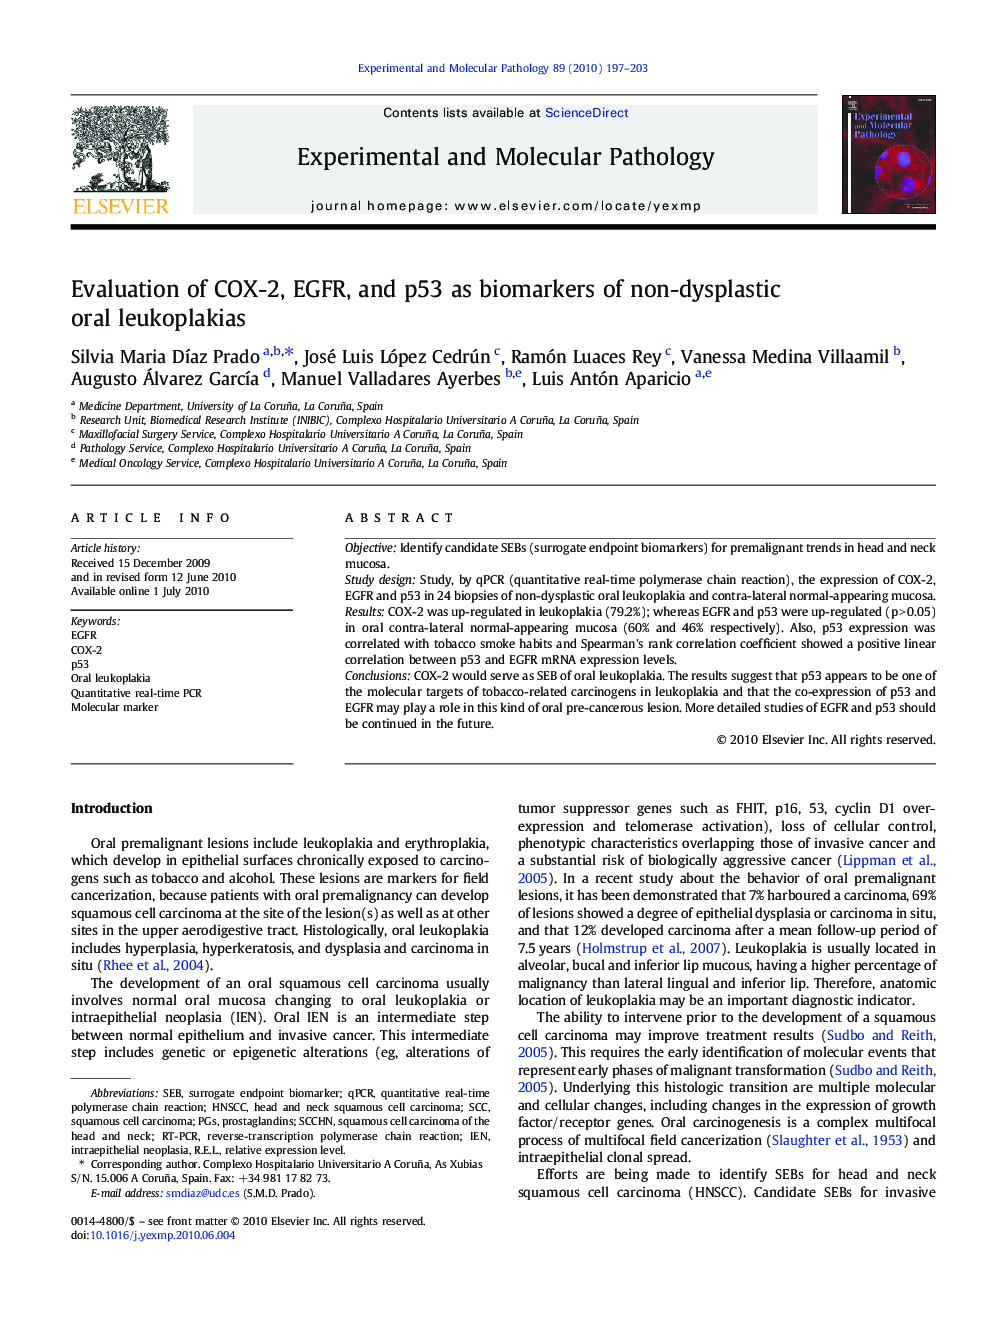 Evaluation of COX-2, EGFR, and p53 as biomarkers of non-dysplastic oral leukoplakias